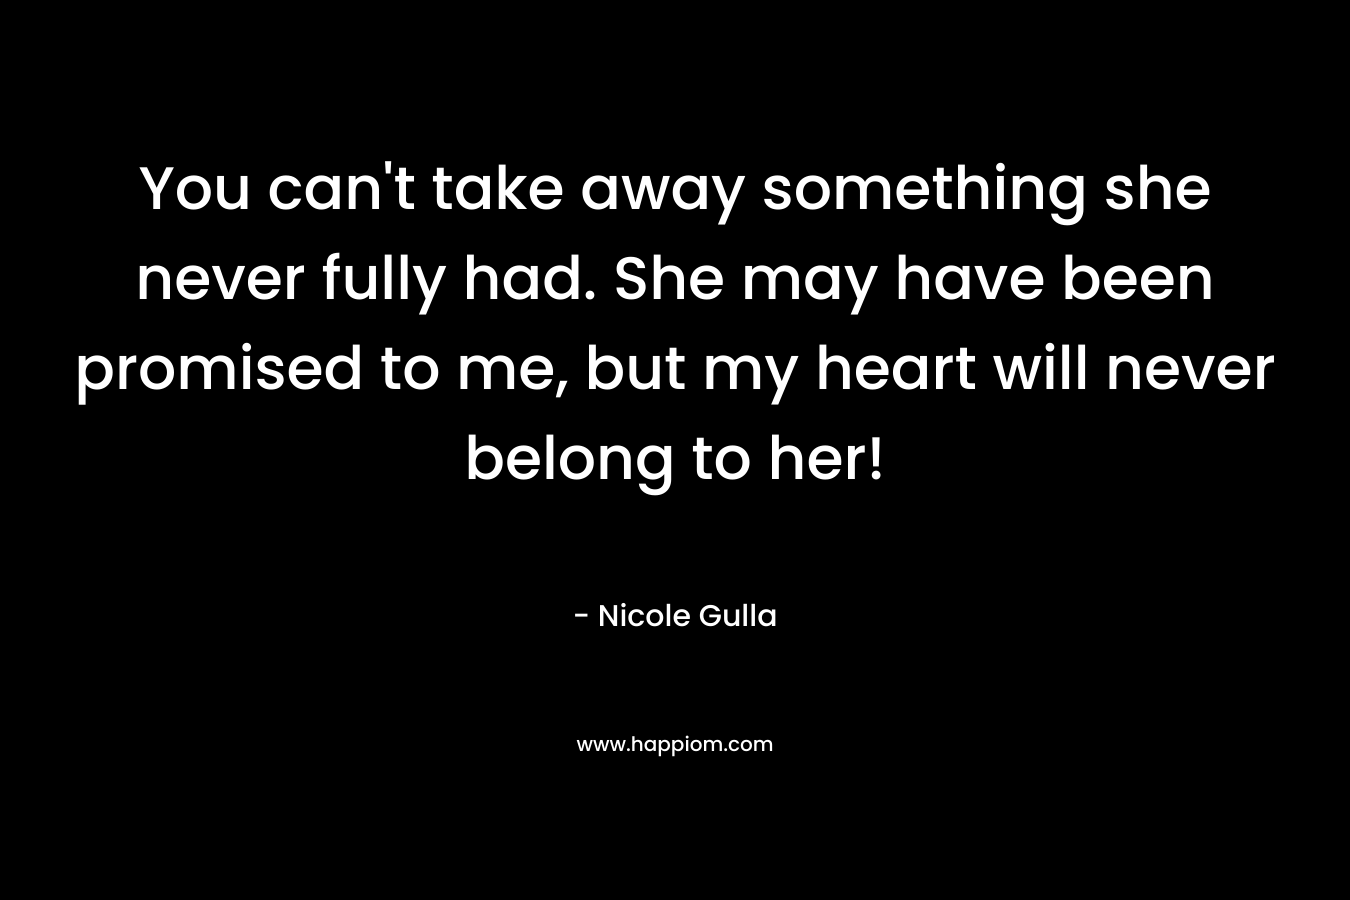 You can’t take away something she never fully had. She may have been promised to me, but my heart will never belong to her! – Nicole Gulla